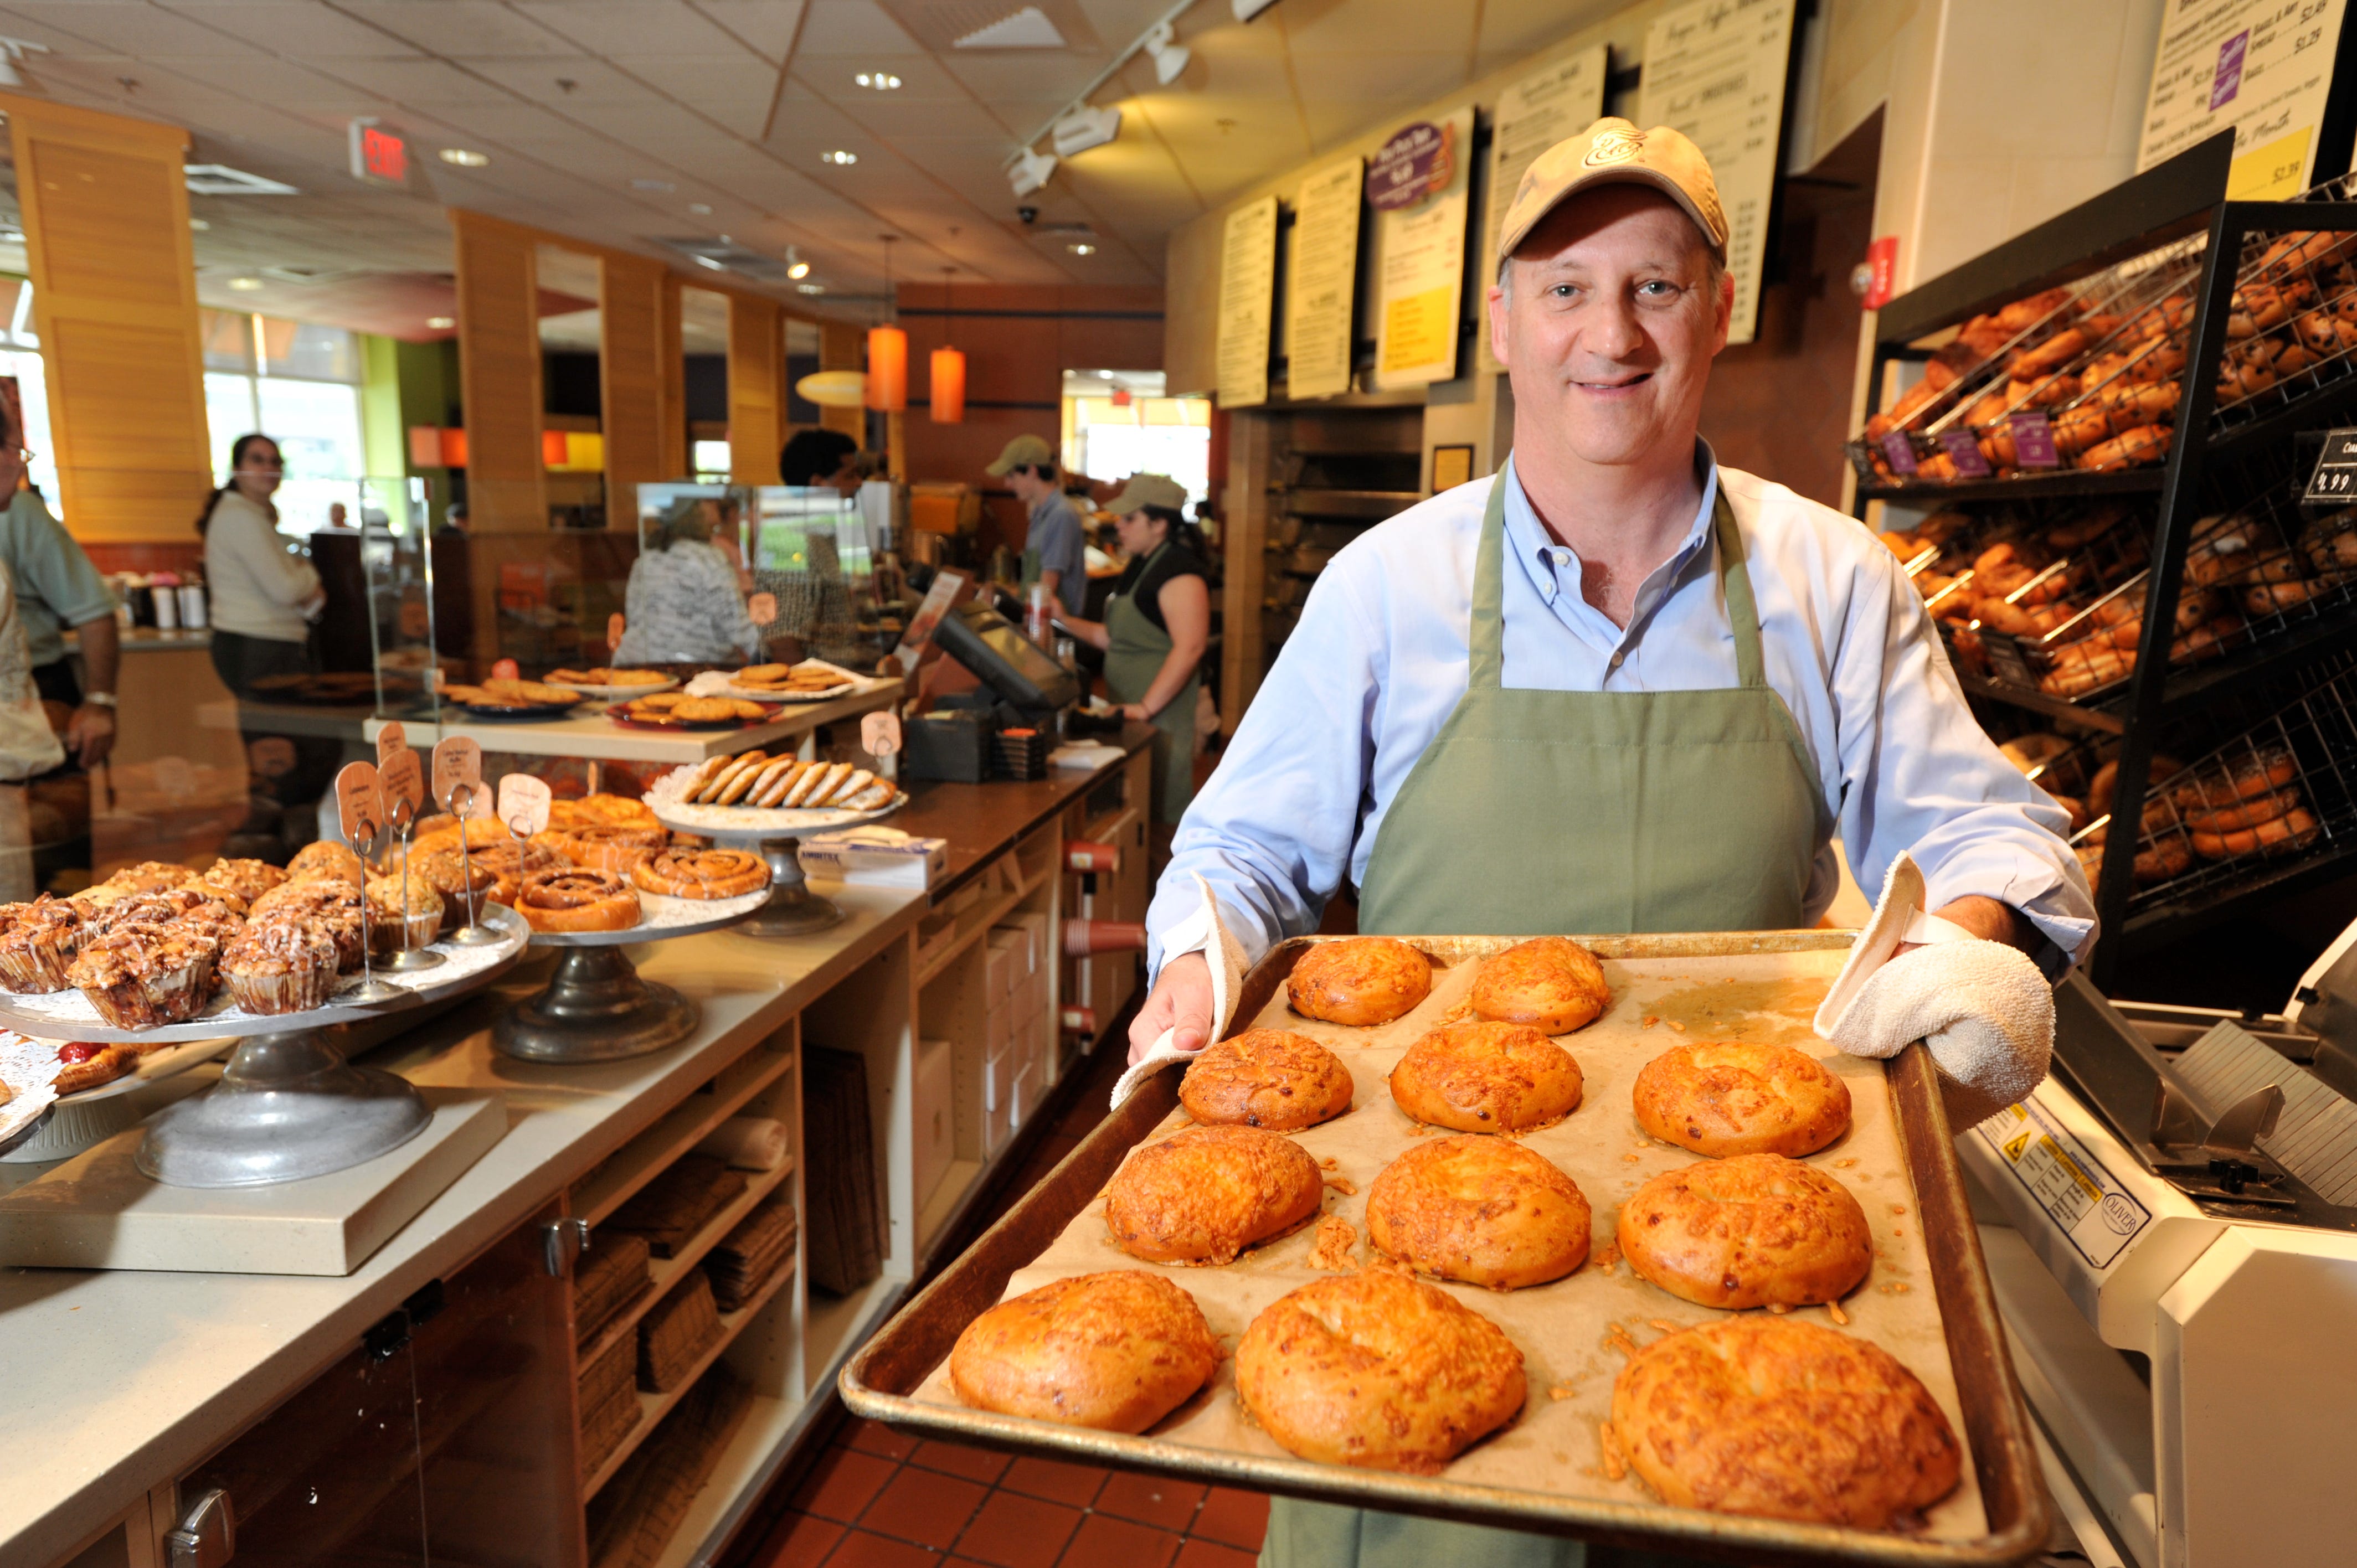 Panera CEO eating on $4.50 a day. 